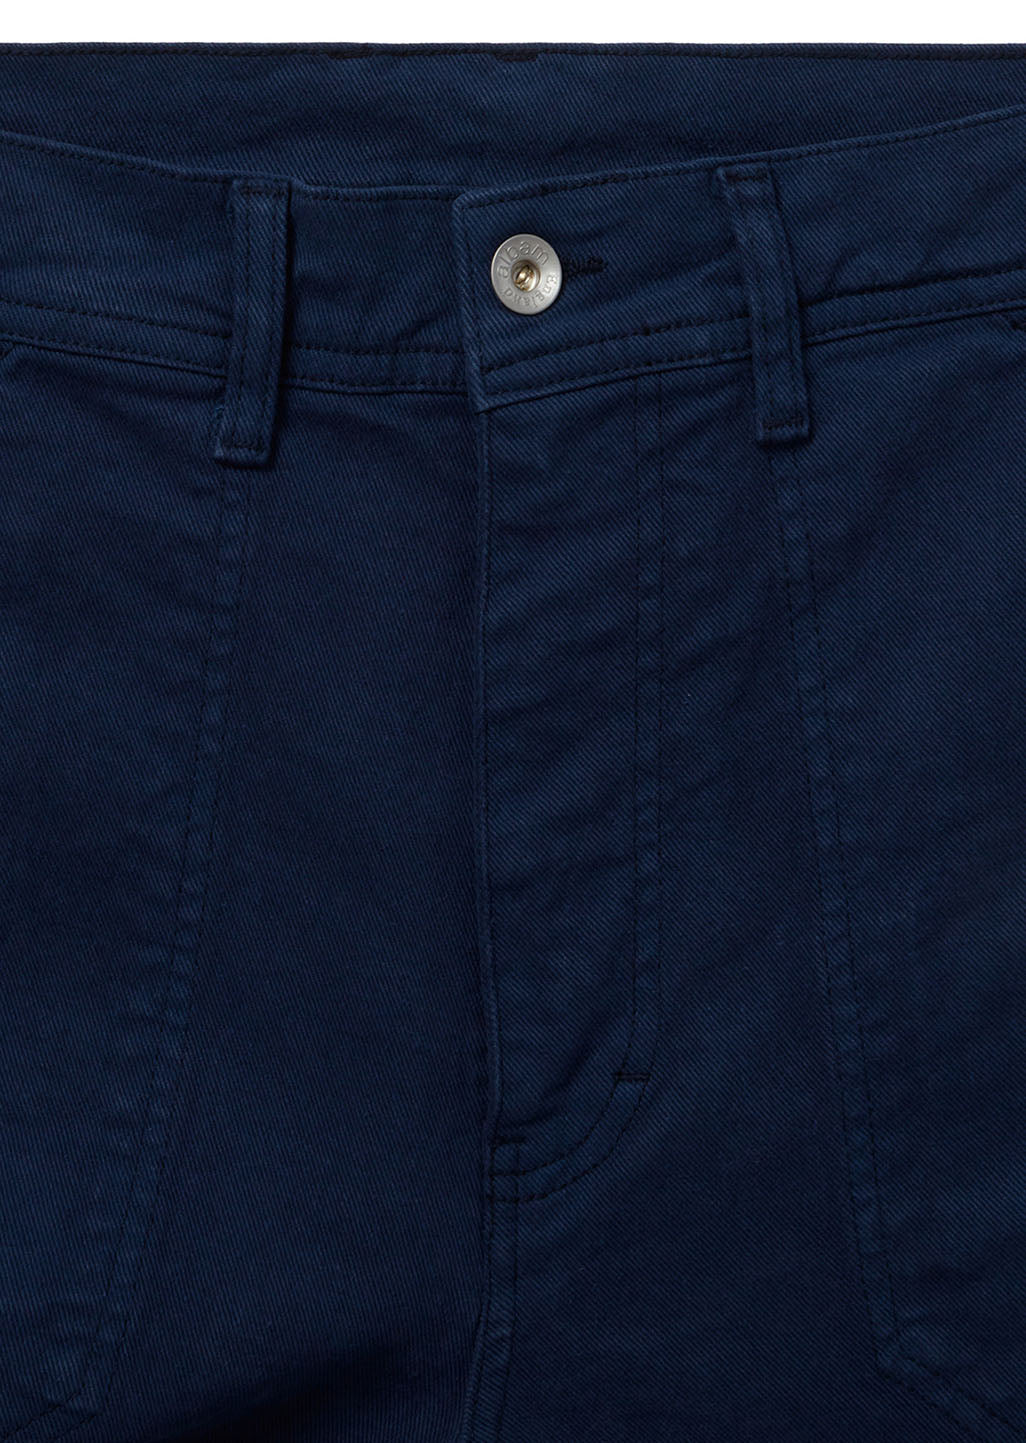 Gd Work Pant in Navy – albam Clothing